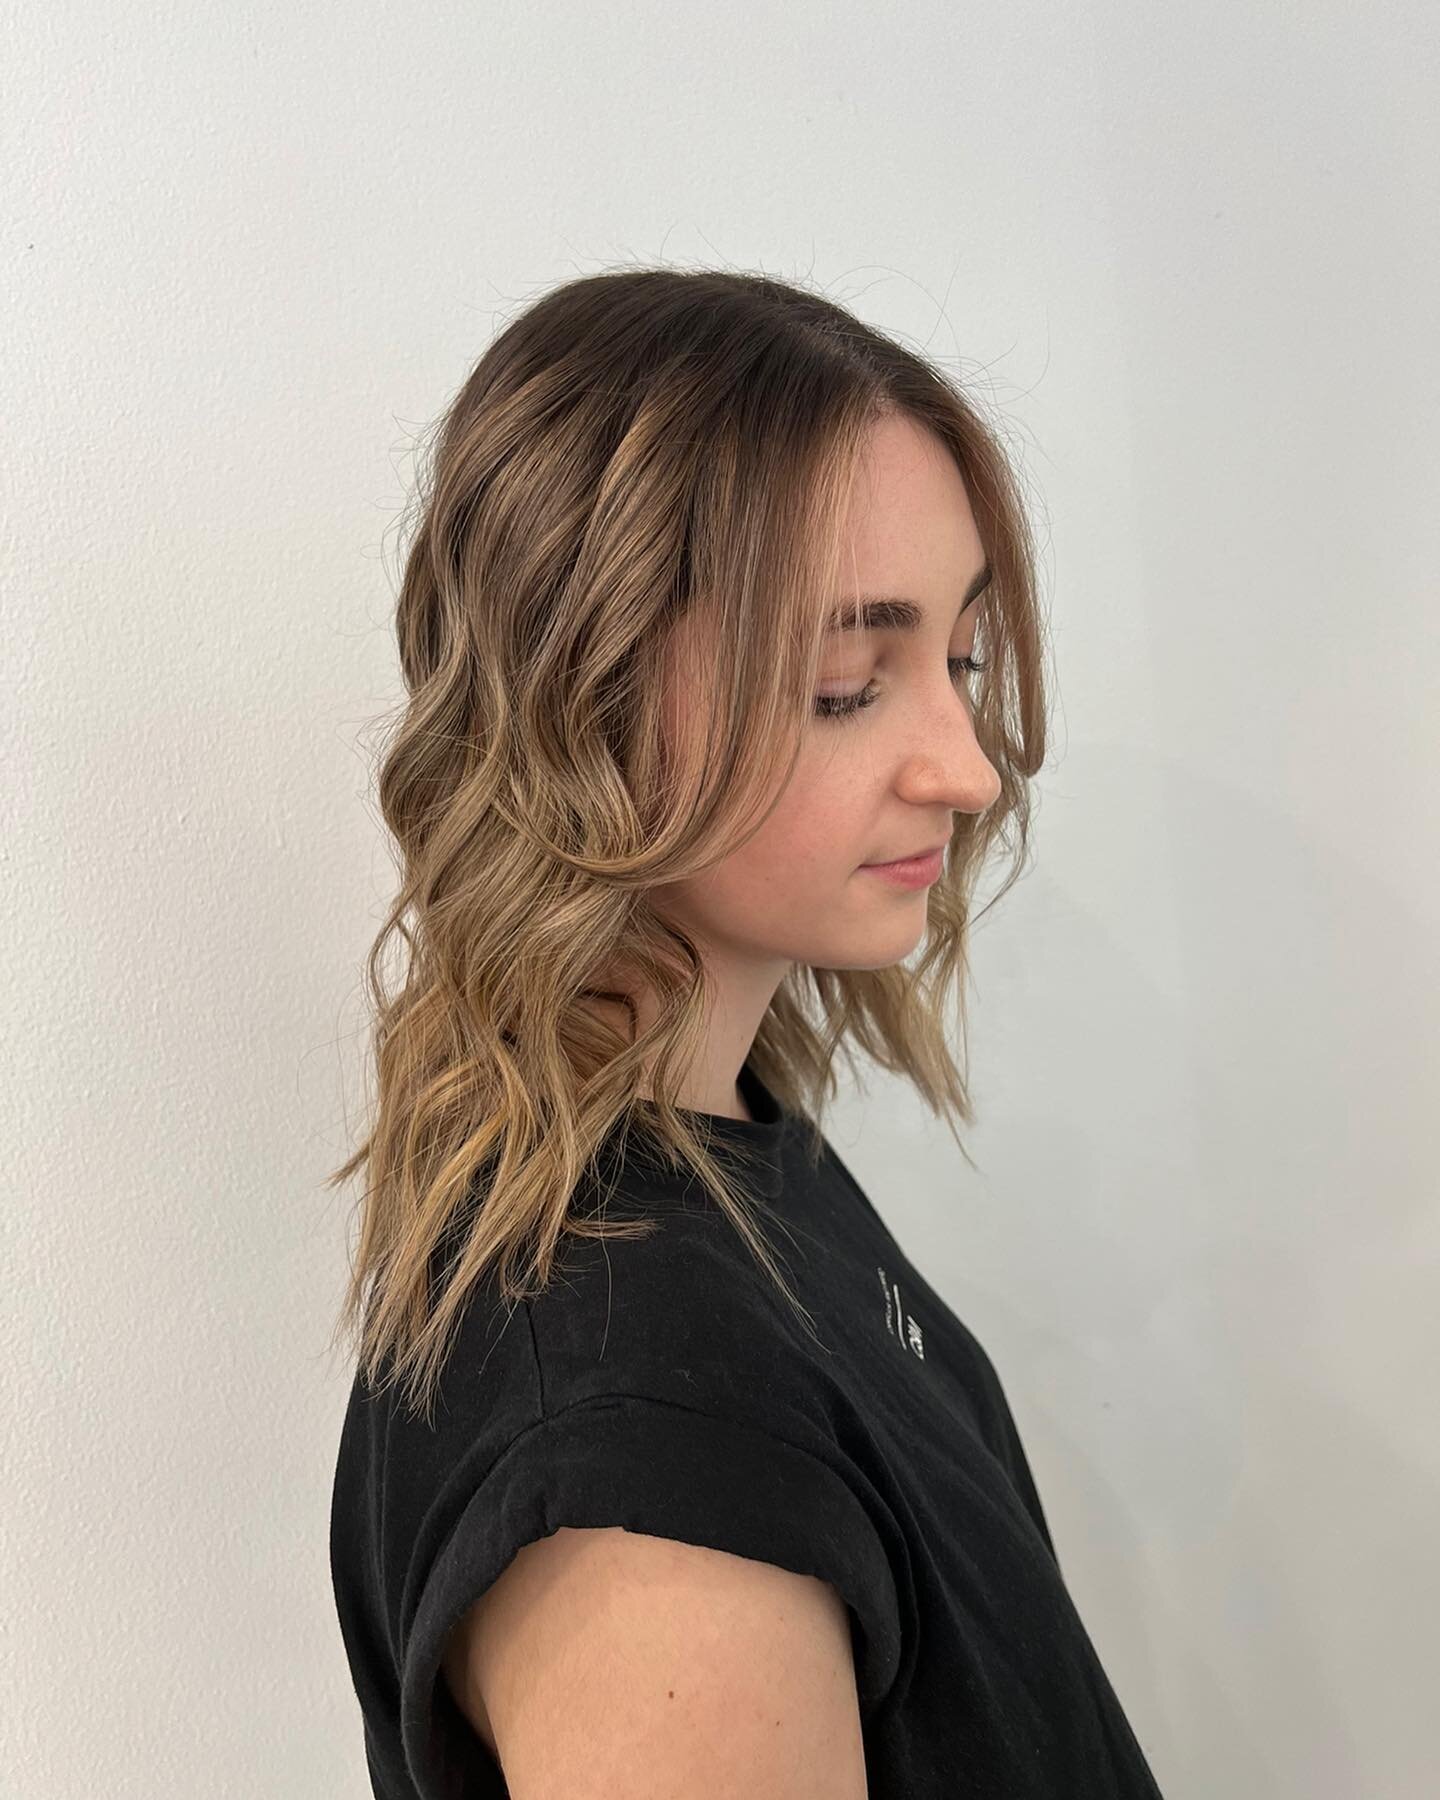 A beautiful bronde created by Darcy and styled by Rocco! #bronde #brondehair #brondebalayage #wella #wellahaircolor